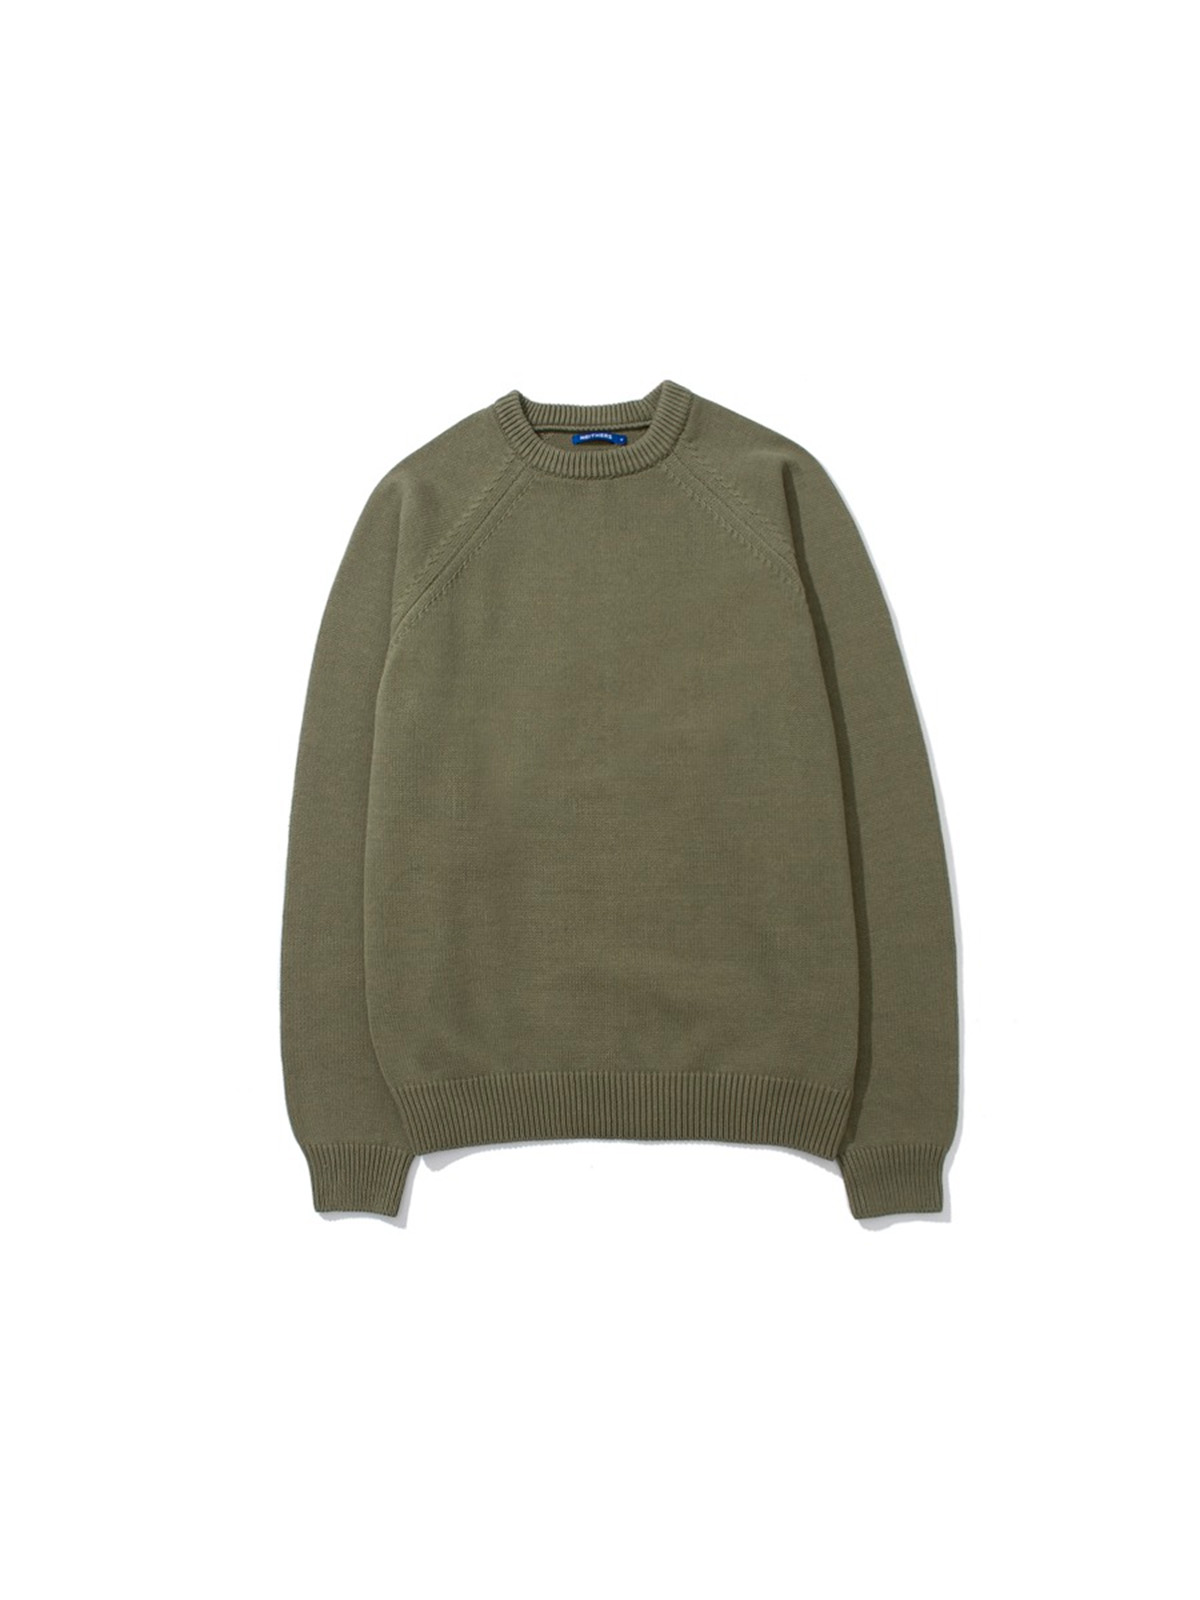 BOXER KNITTED SWEATER (OLIVE)